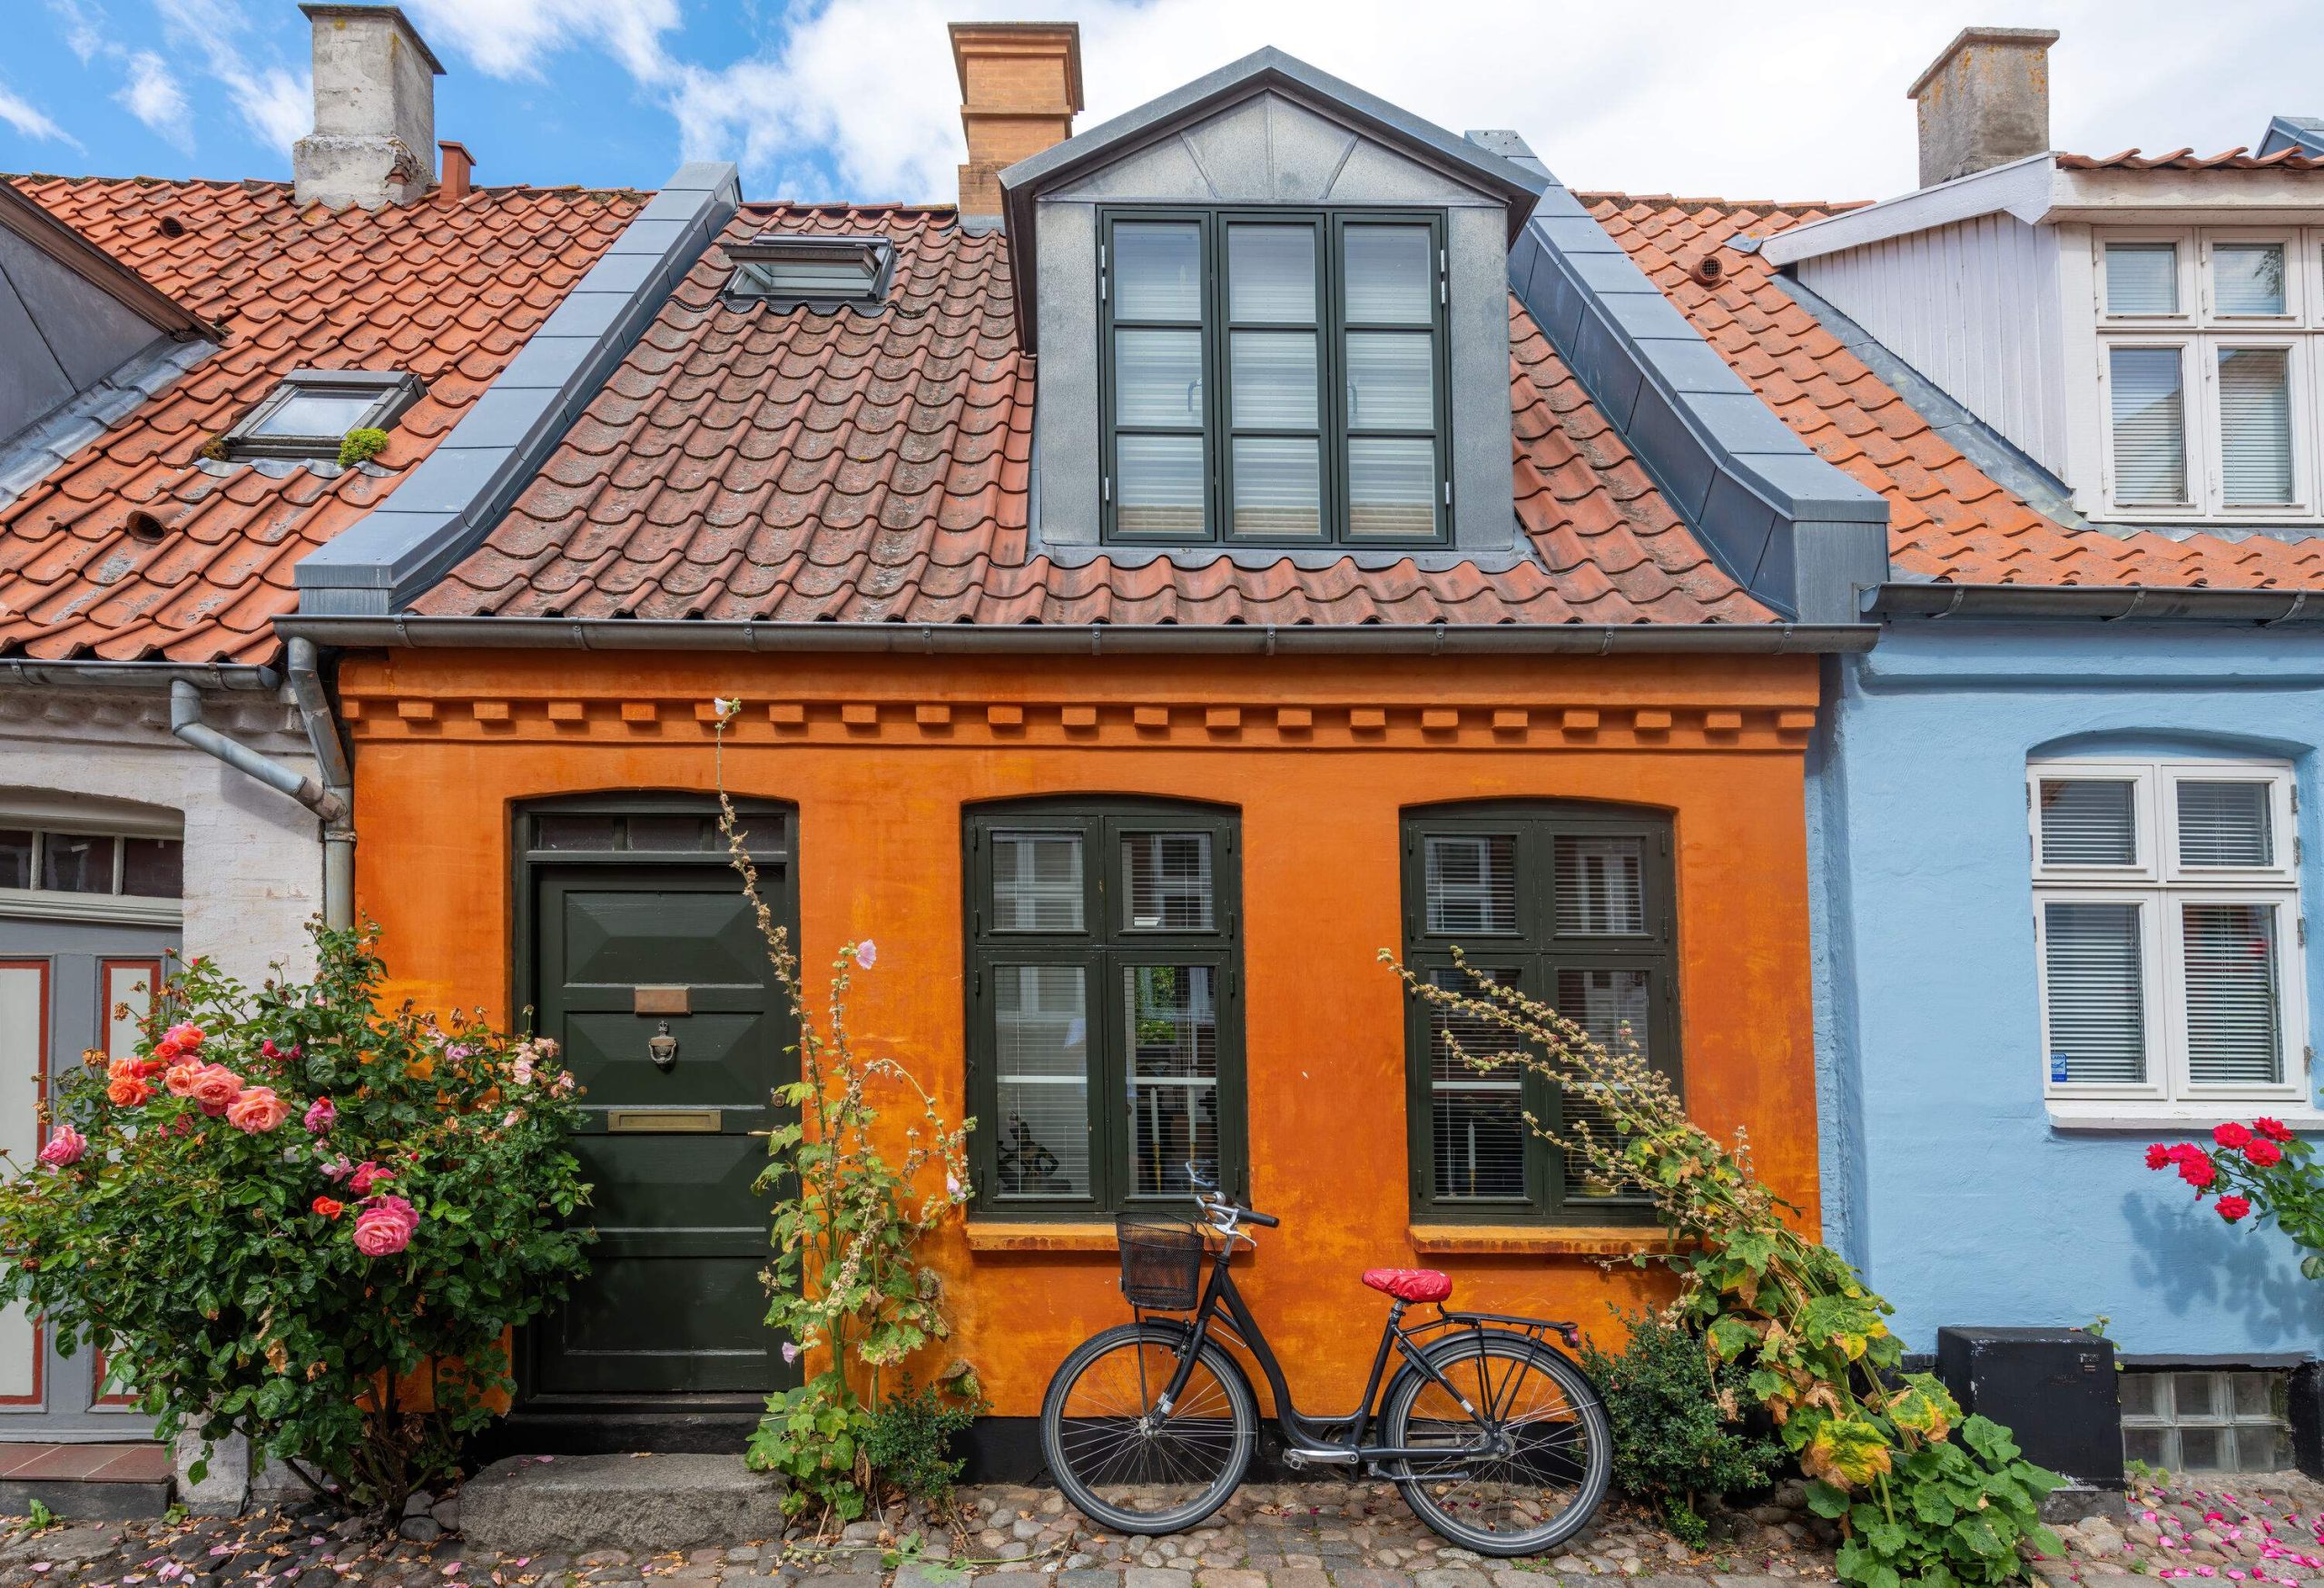 A bicycle leaning against the window of an orange cottage.